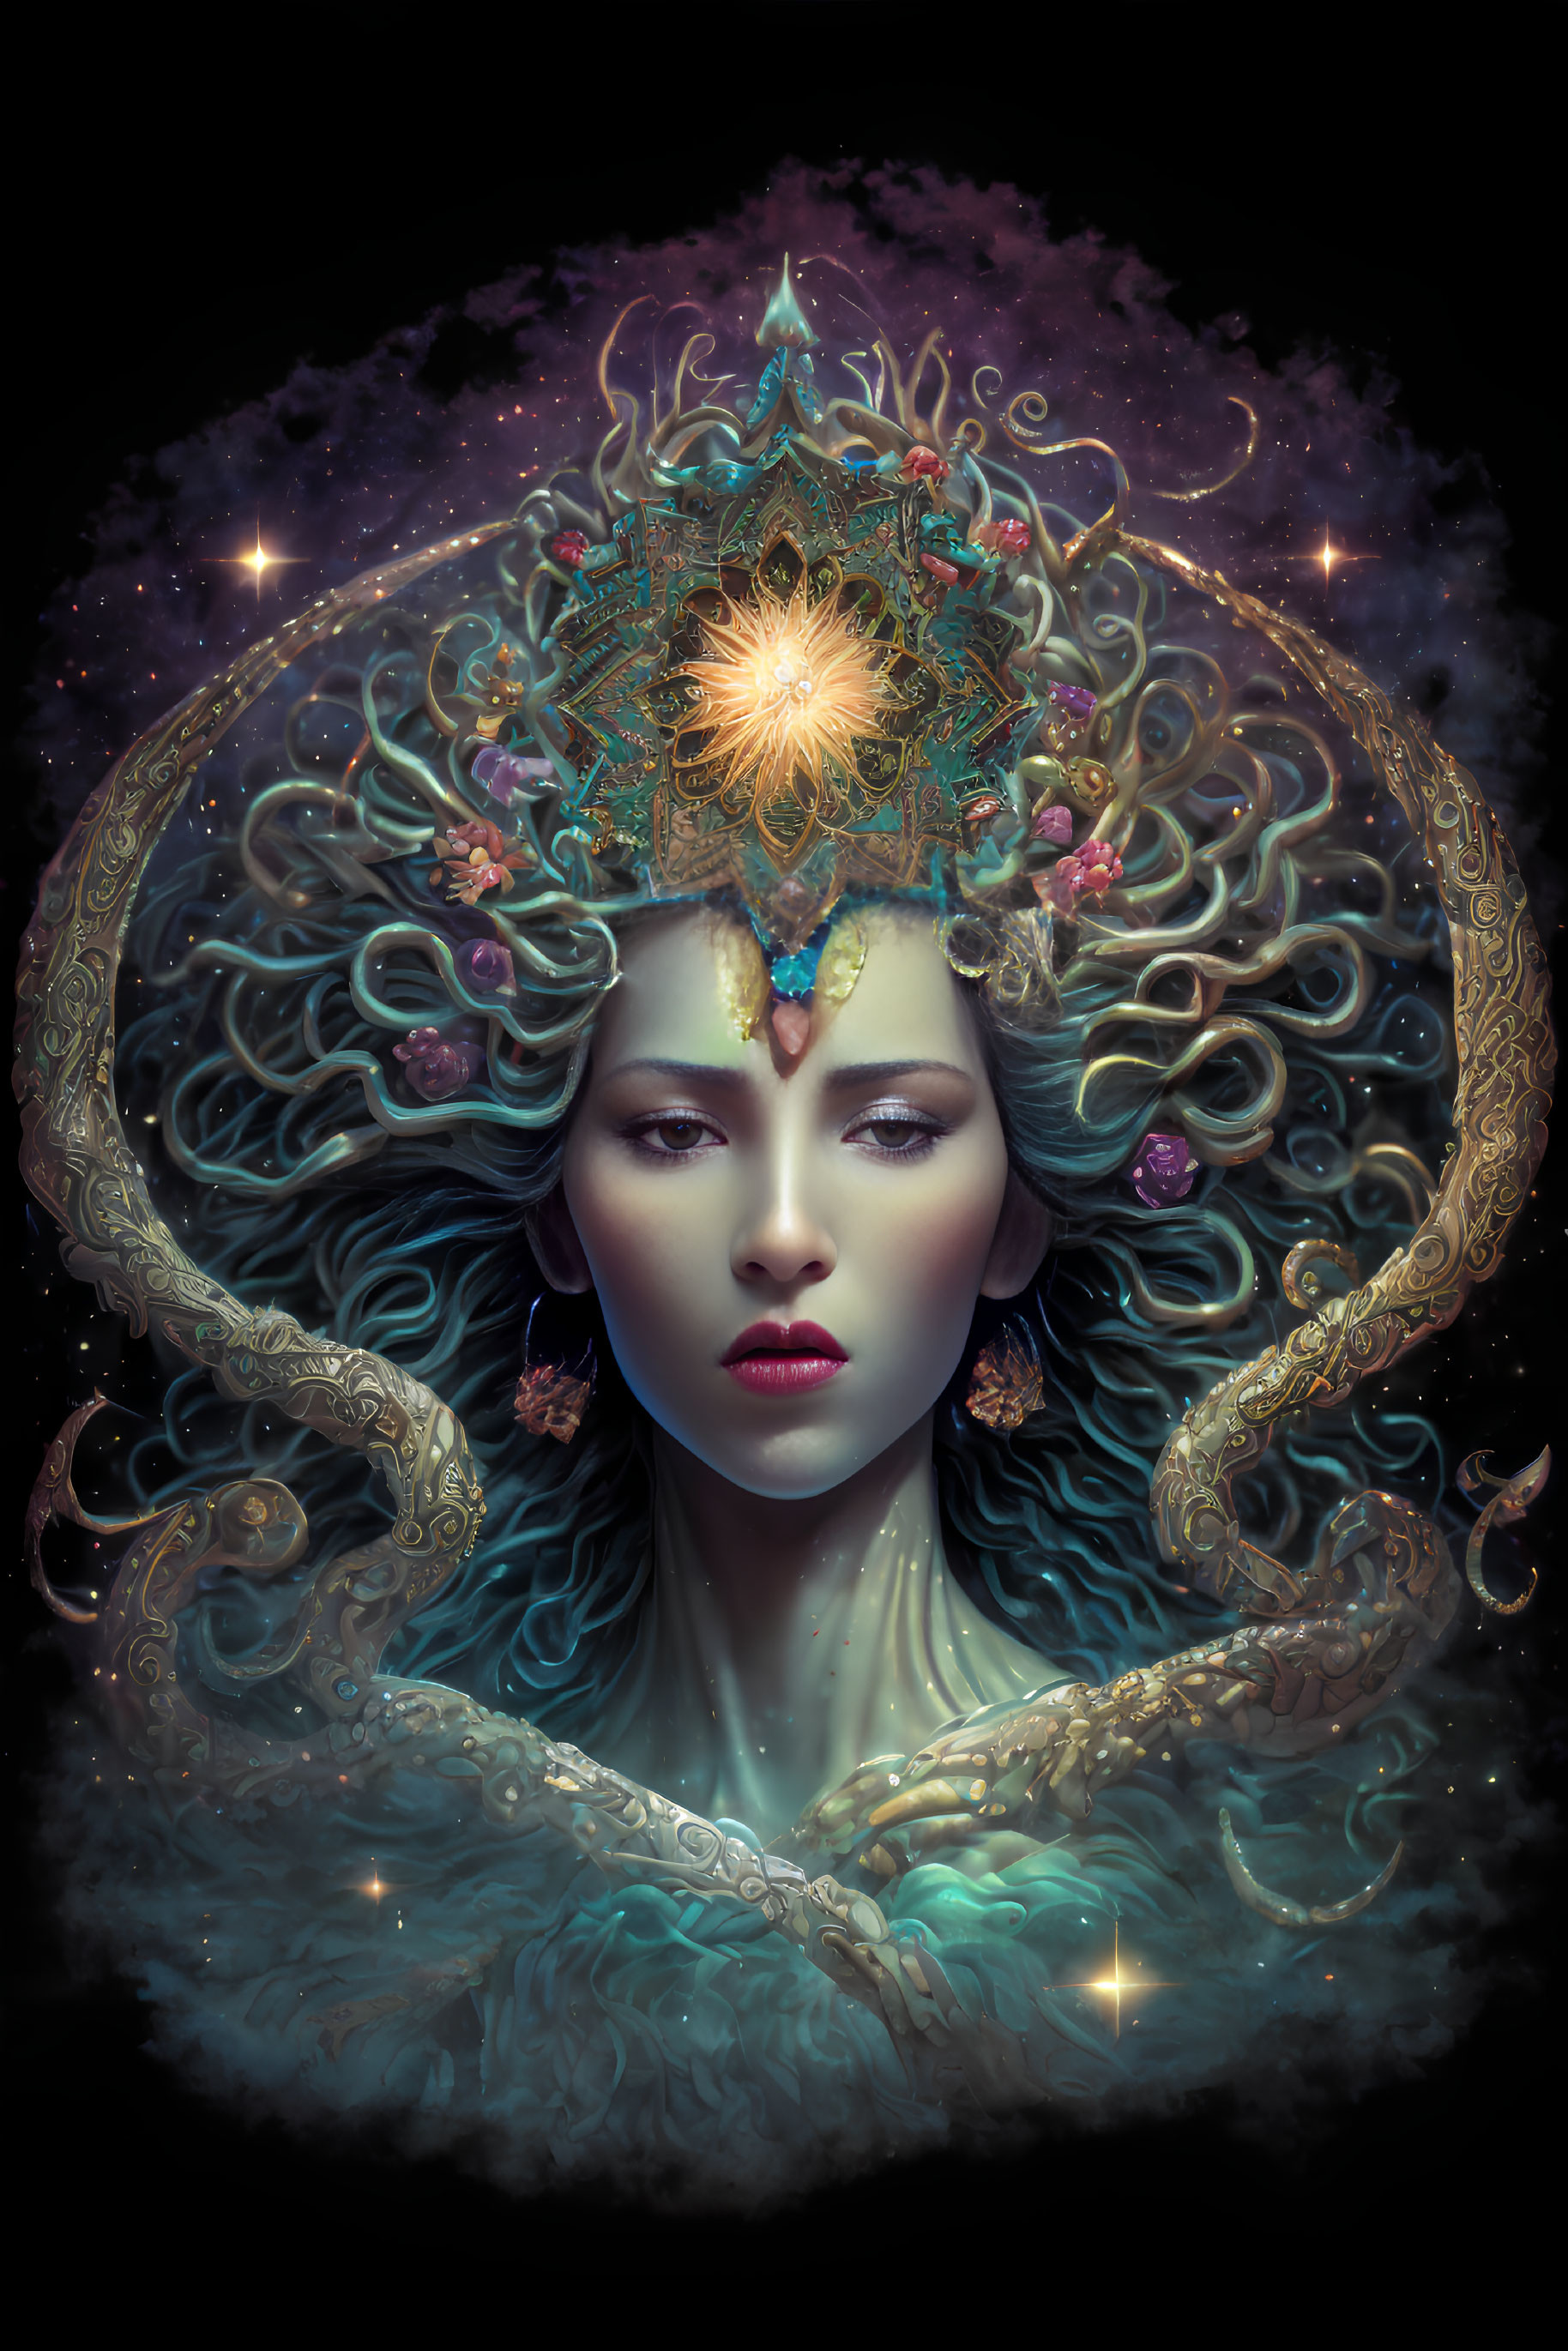 Ethereal woman with ornate crown and golden details in celestial setting